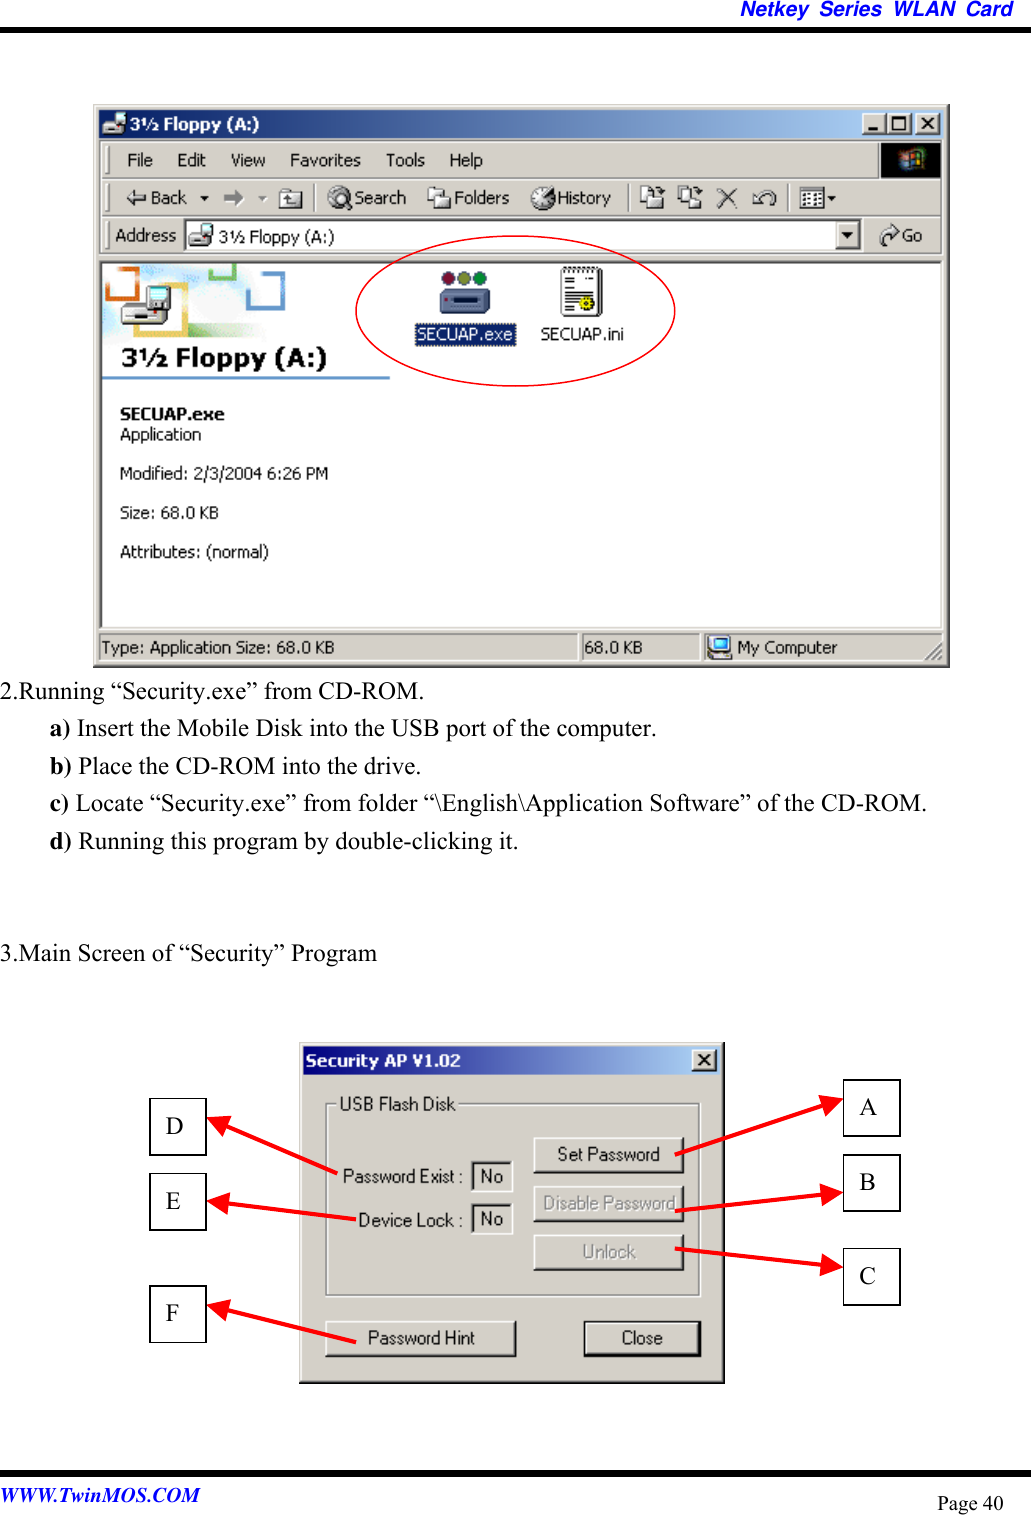   Netkey Series WLAN Card                  2.Running “Security.exe” from CD-ROM. a) Insert the Mobile Disk into the USB port of the computer. b) Place the CD-ROM into the drive. c) Locate “Security.exe” from folder “\English\Application Software” of the CD-ROM. d) Running this program by double-clicking it.   3.Main Screen of “Security” Program   F E D C B A            WWW.TwinMOS.COM  Page 40